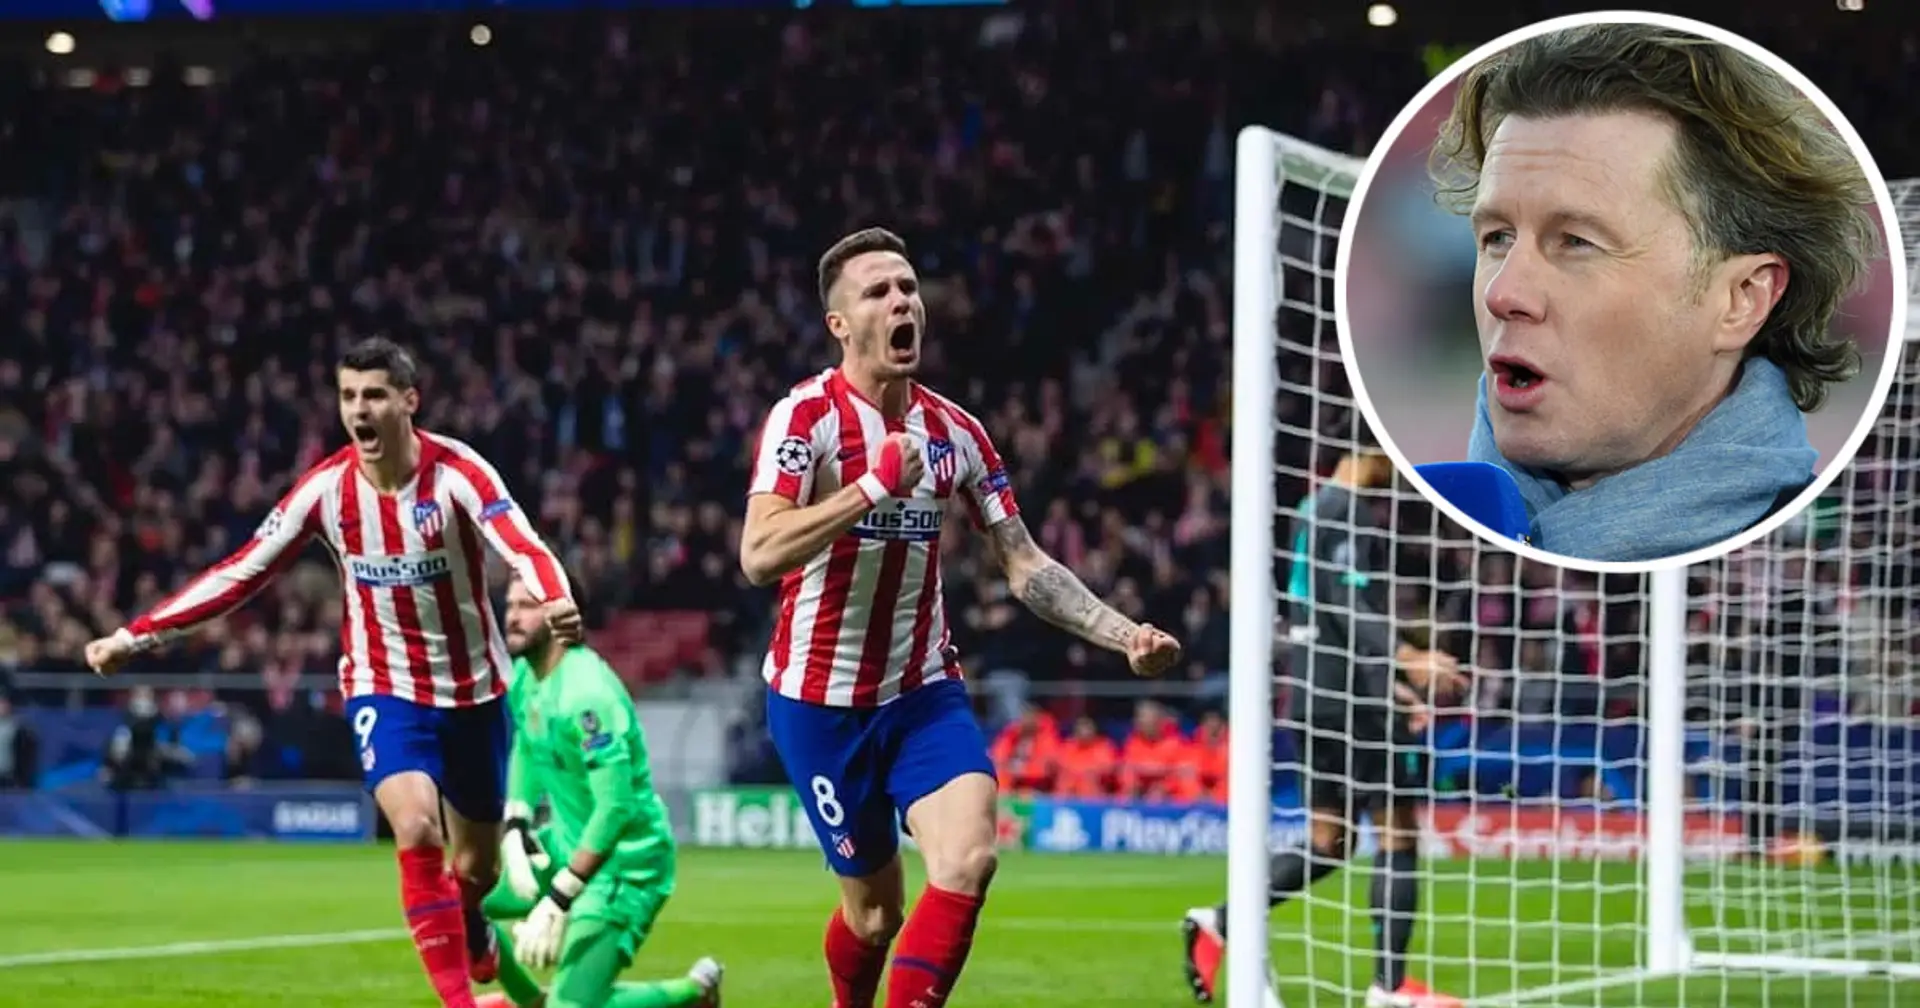 McManaman on CL exit: 'Atletico deserve credit for getting through, they don’t for how they got through'